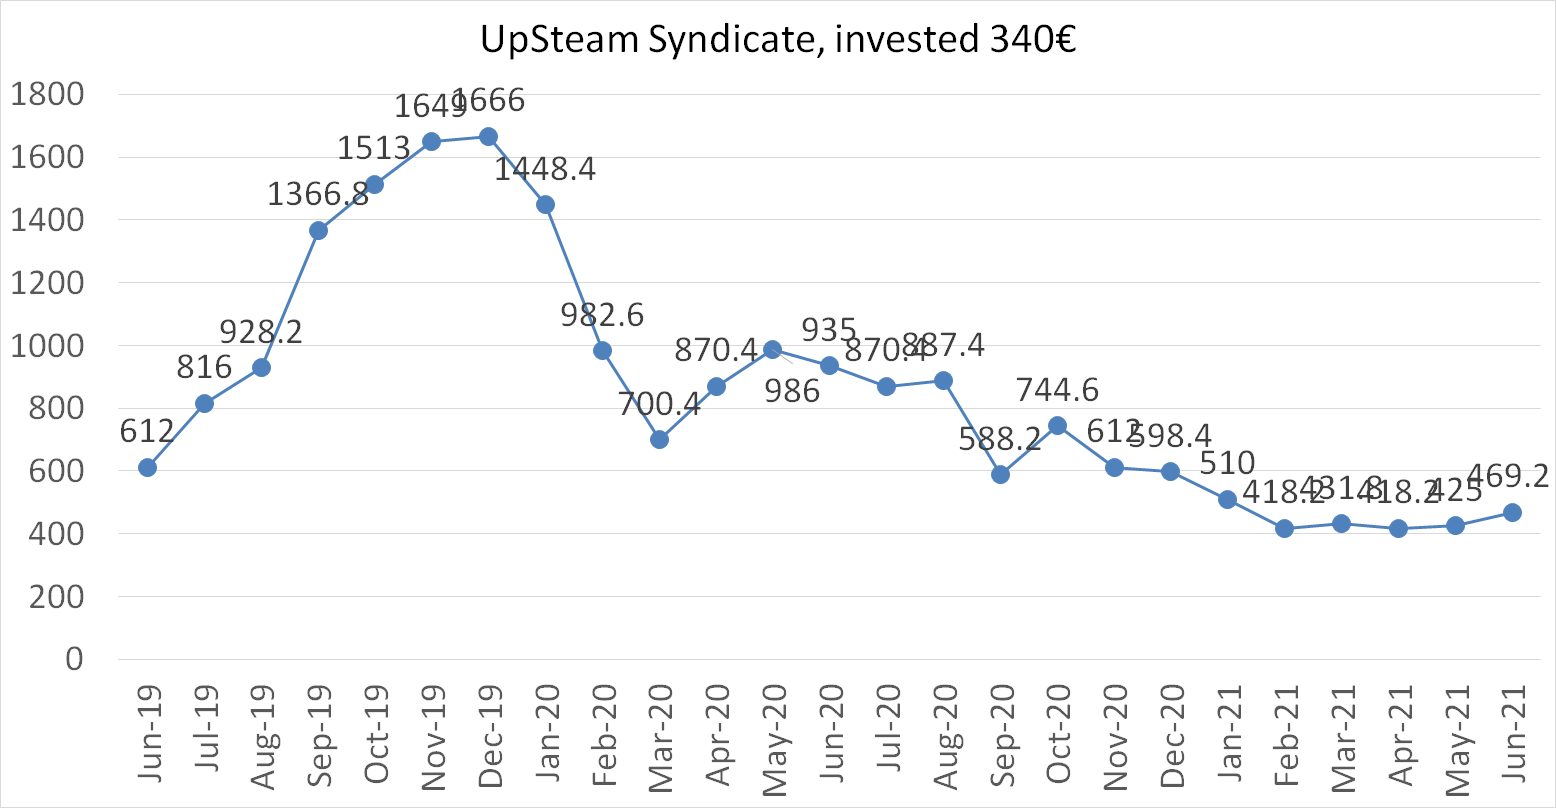 UpSteam syndicate worth in june 2021